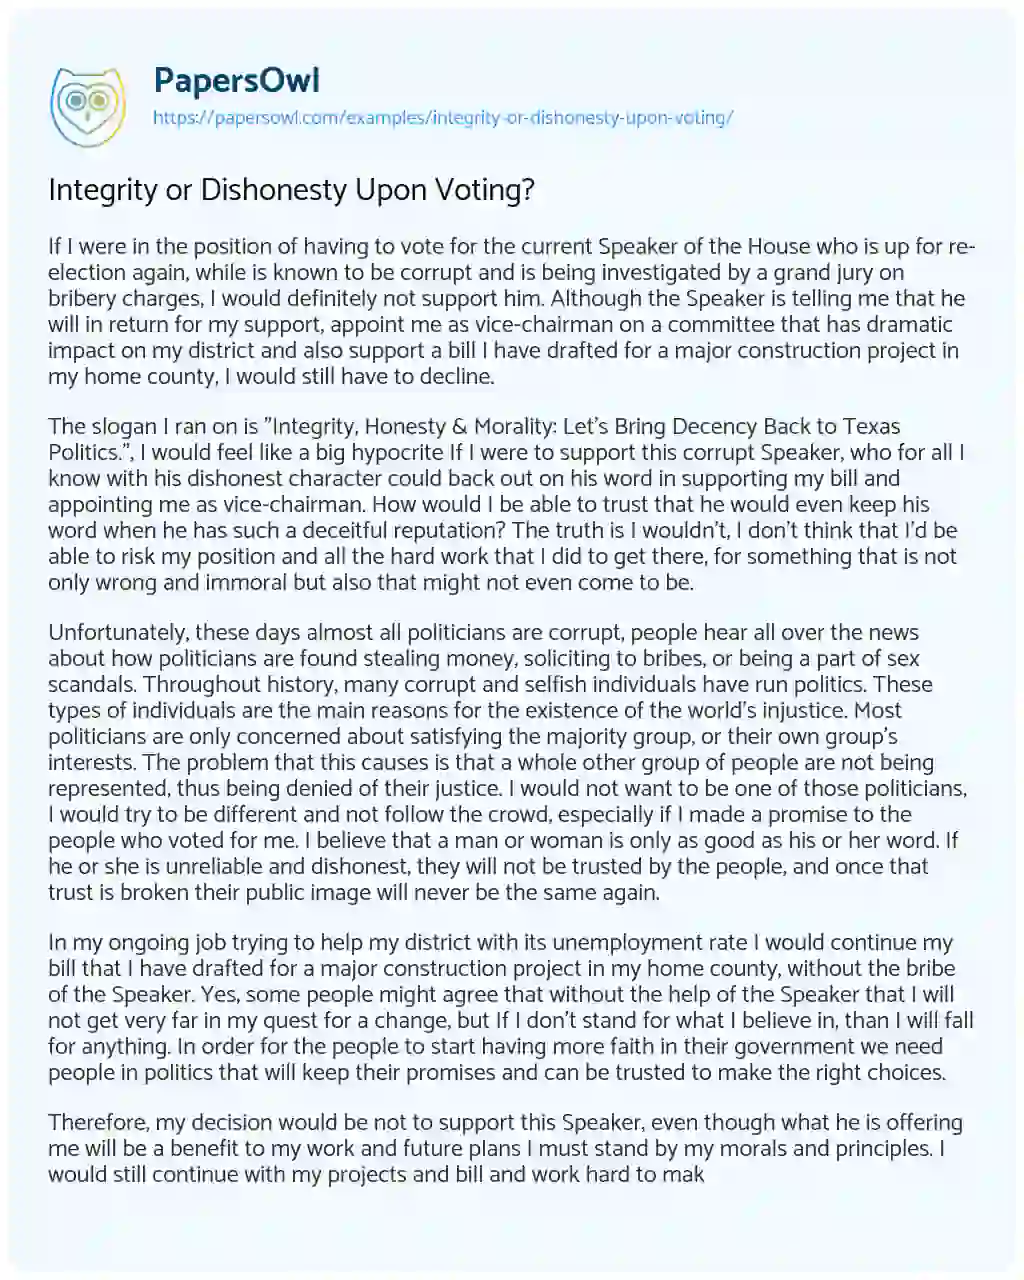 Essay on Integrity or Dishonesty Upon Voting?